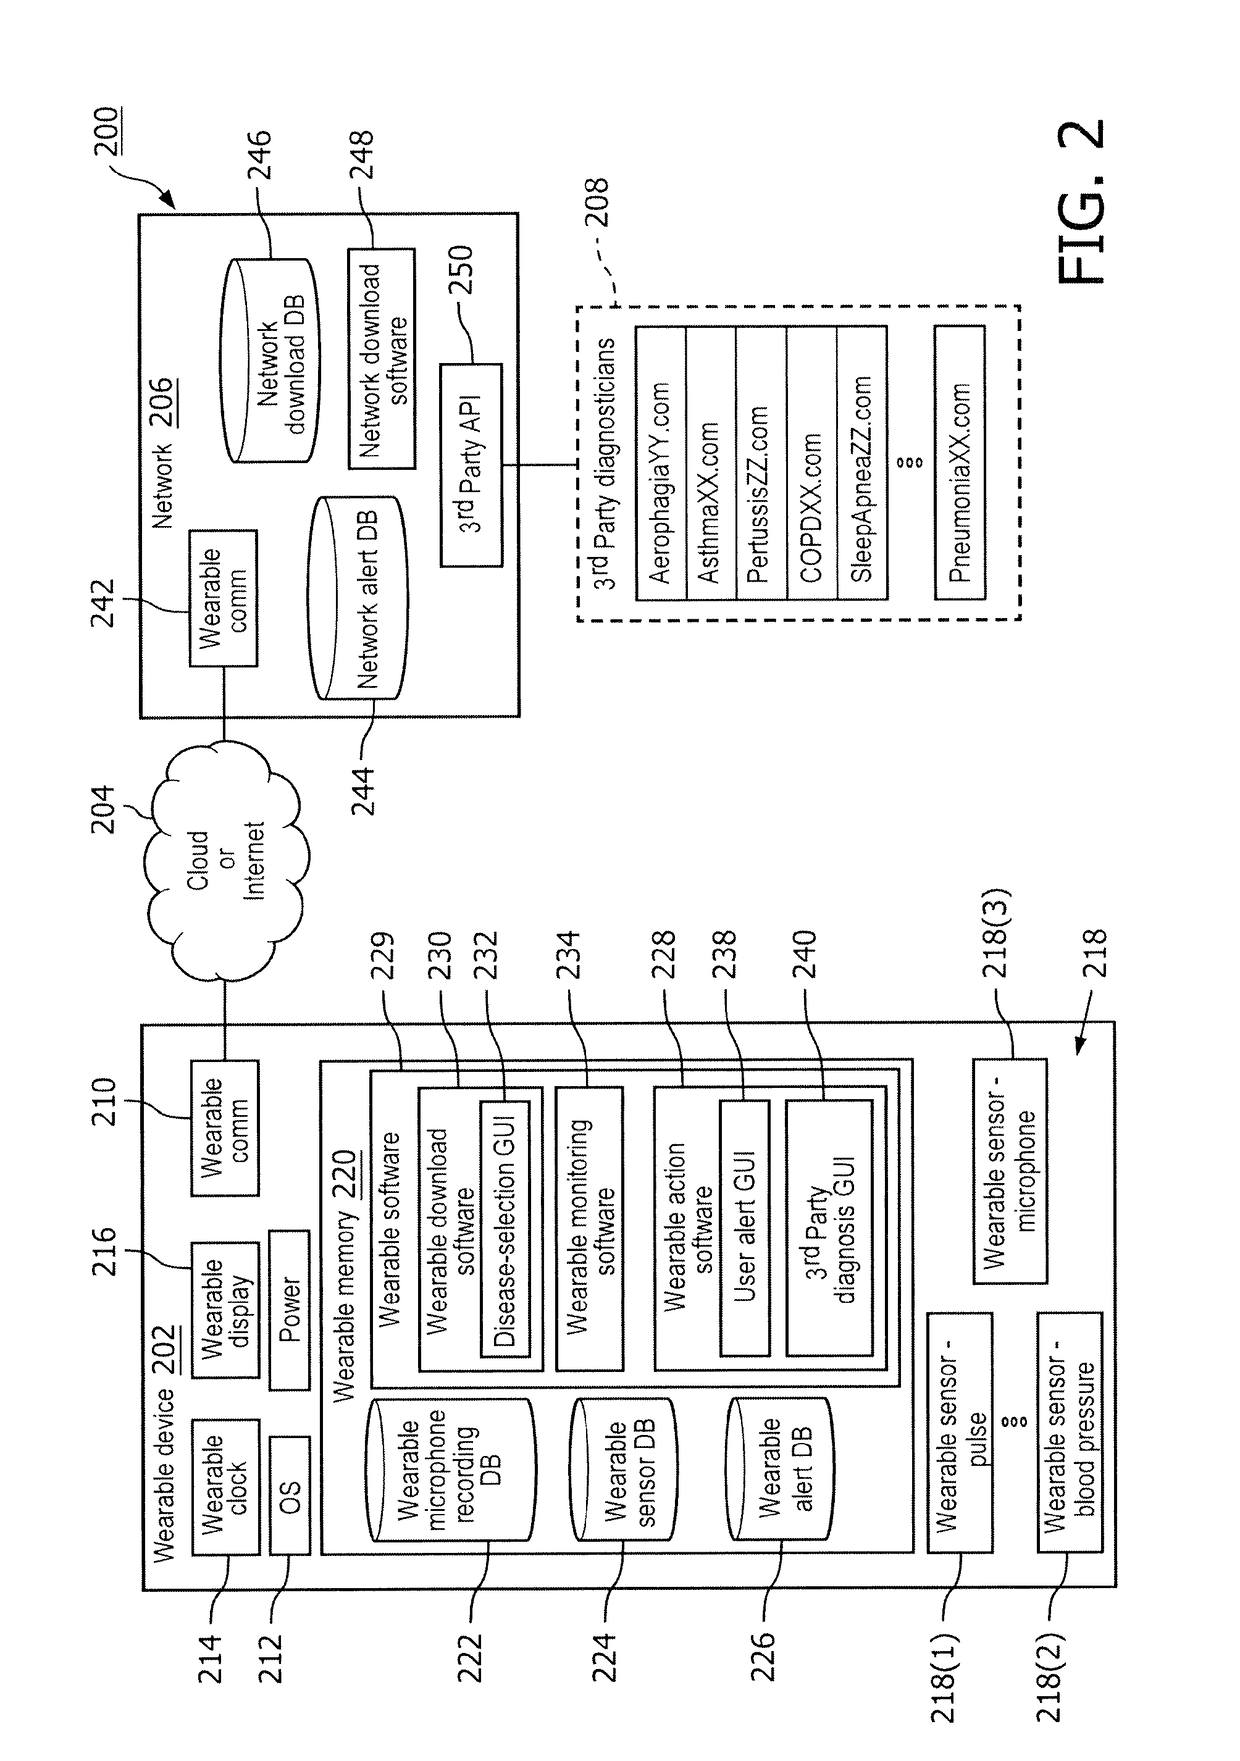 Wearable device obtaining audio data for diagnosis